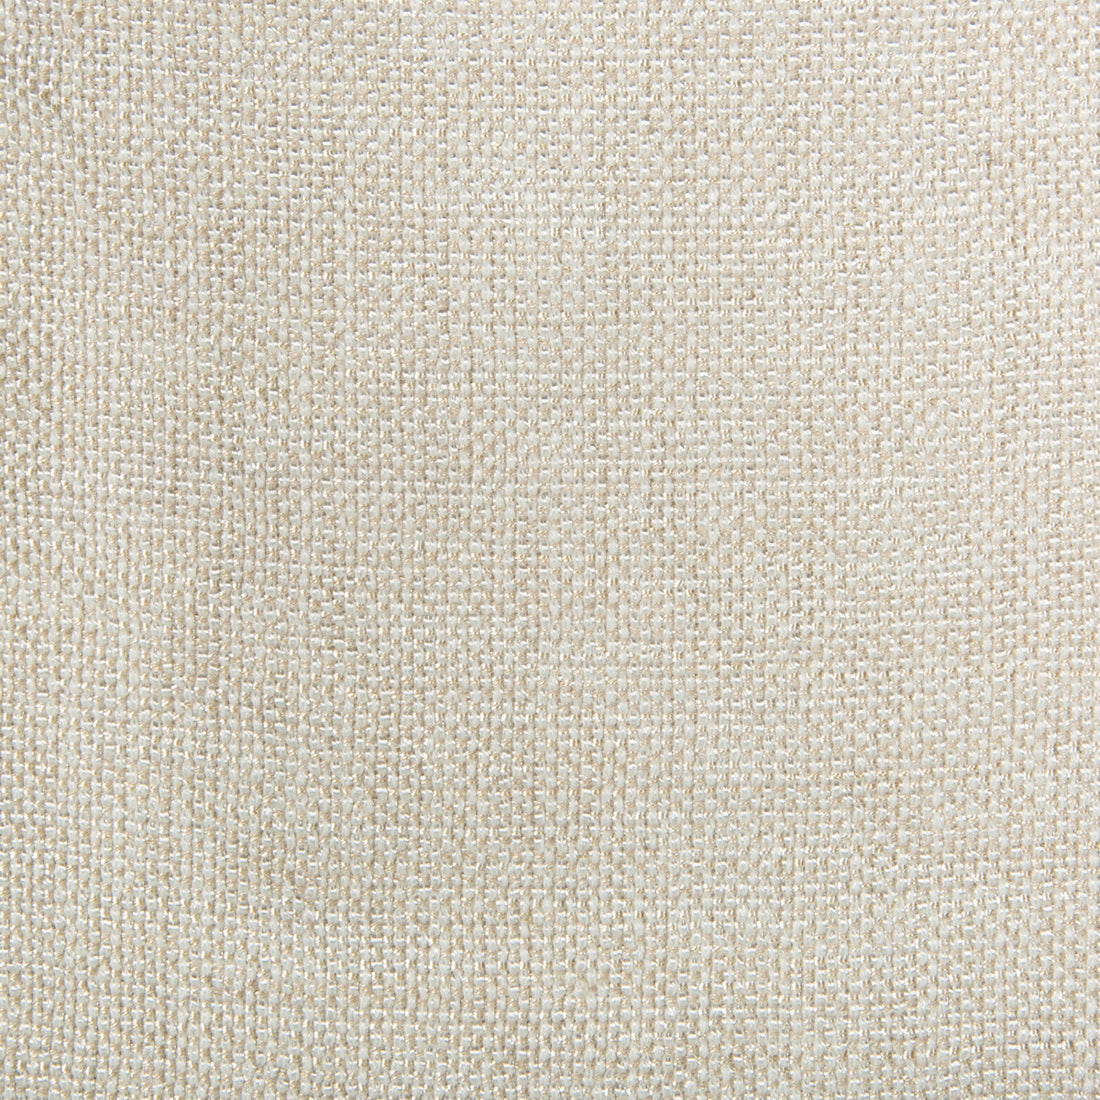 Kravet Contract fabric in 34926-101 color - pattern 34926.101.0 - by Kravet Contract